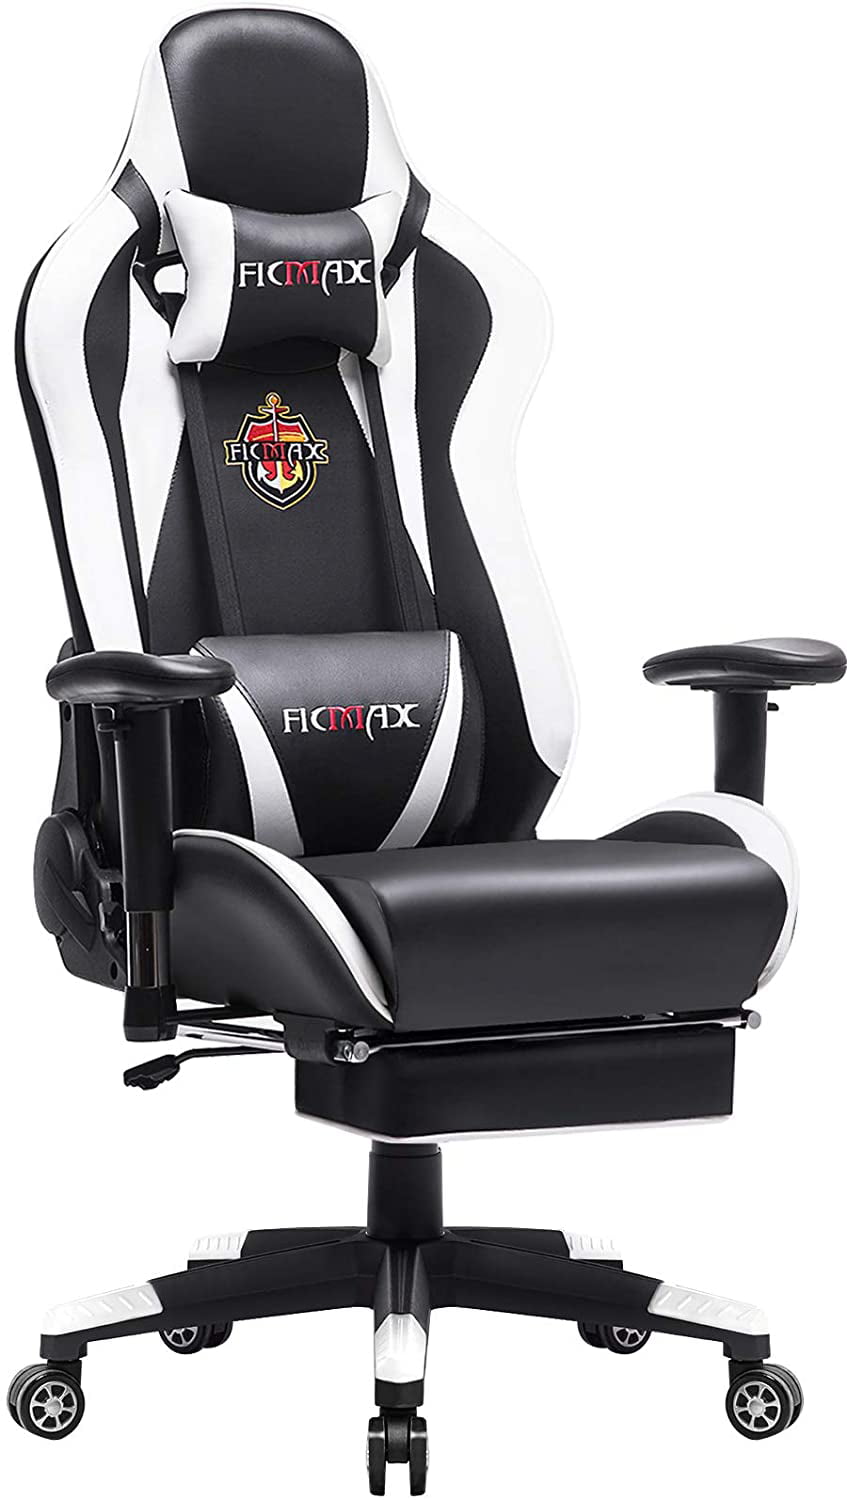 Details about   Luxury Ergonomic Gaming Chair Computer High Back Office Desk Swivel Footrest US 